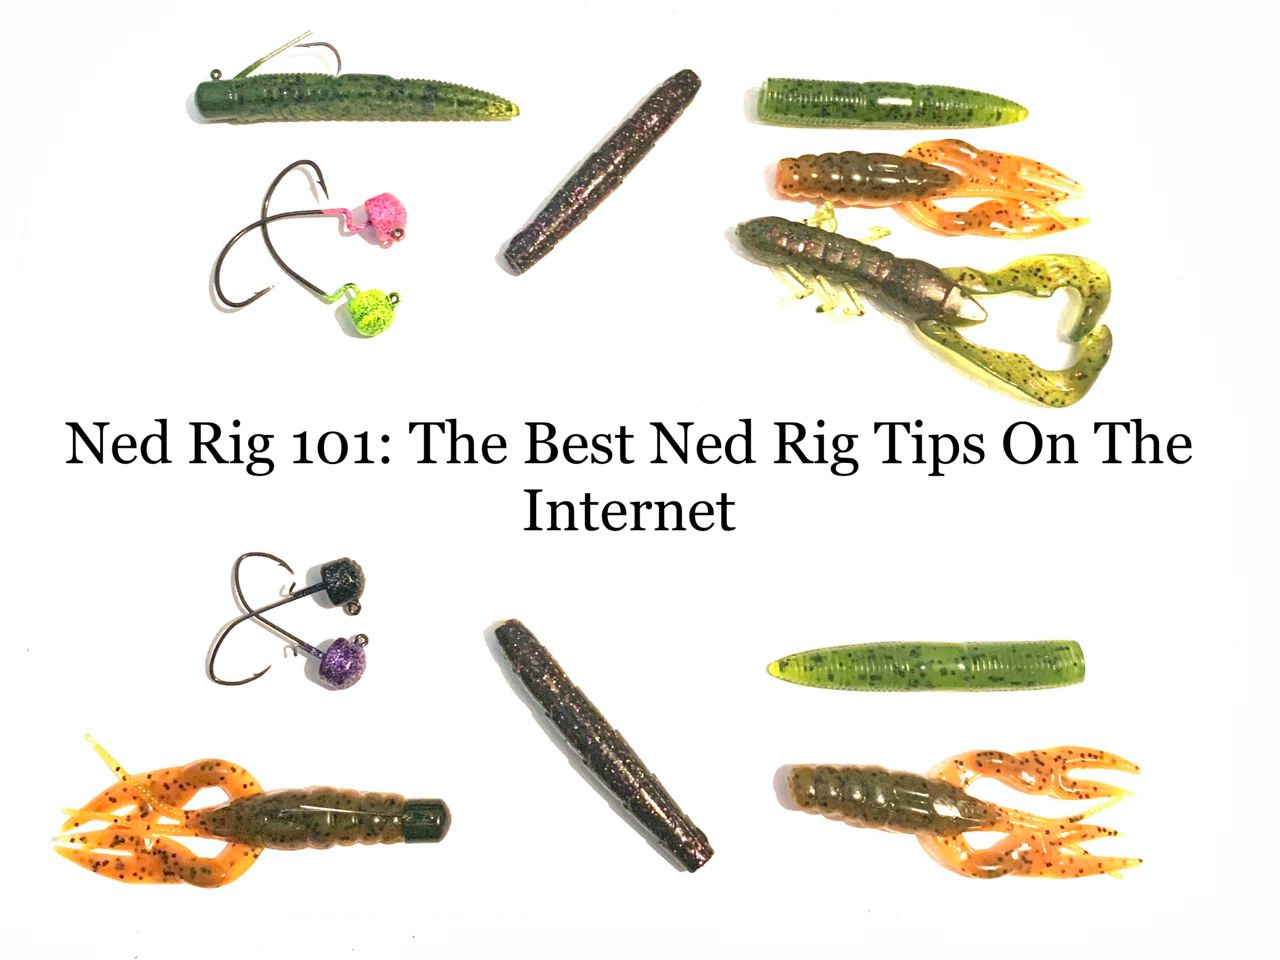 ned rig 101: the best ned rigging tips on the internet